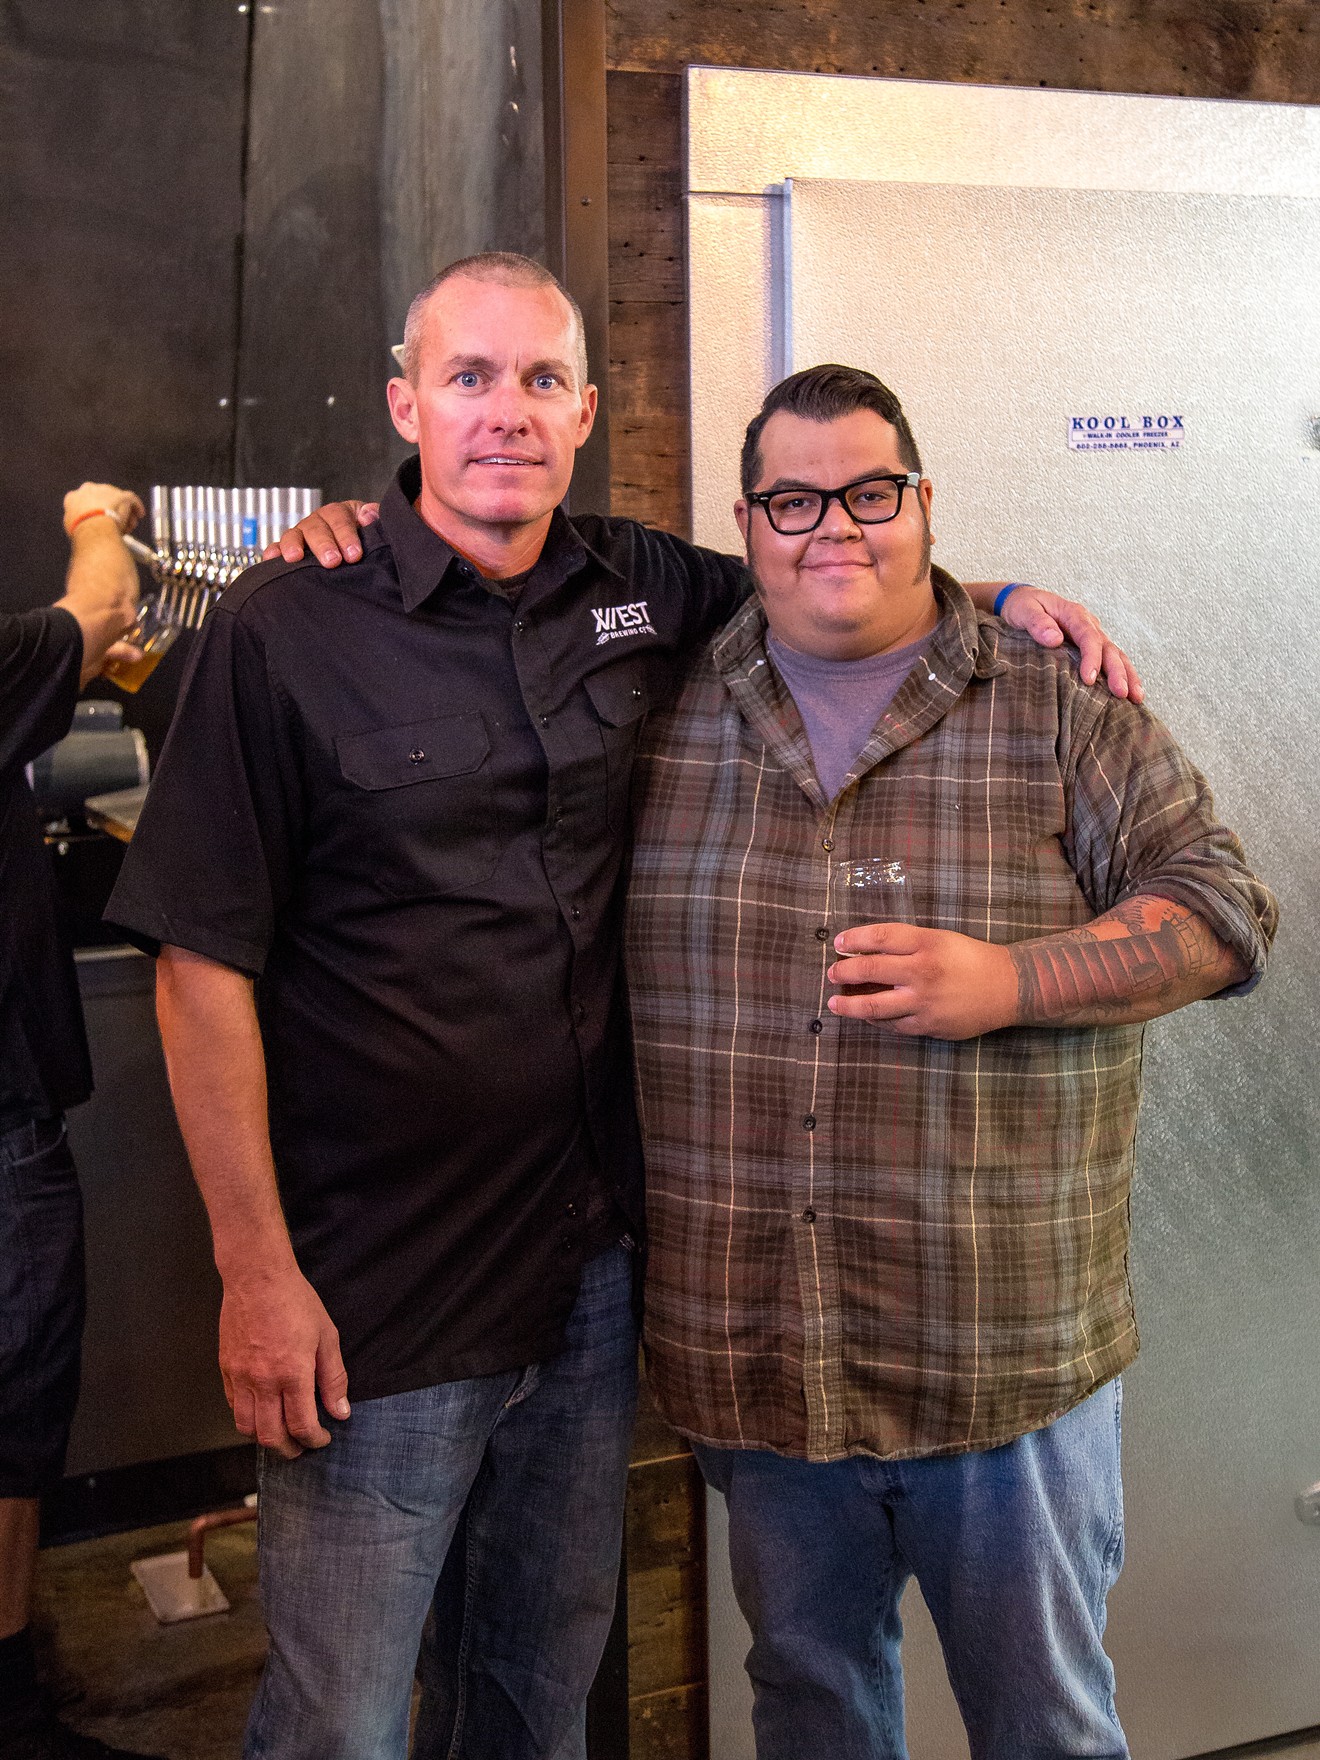 Bryan McCormick (left) and Noel Garcia (right) of 12 West Brewing Co.